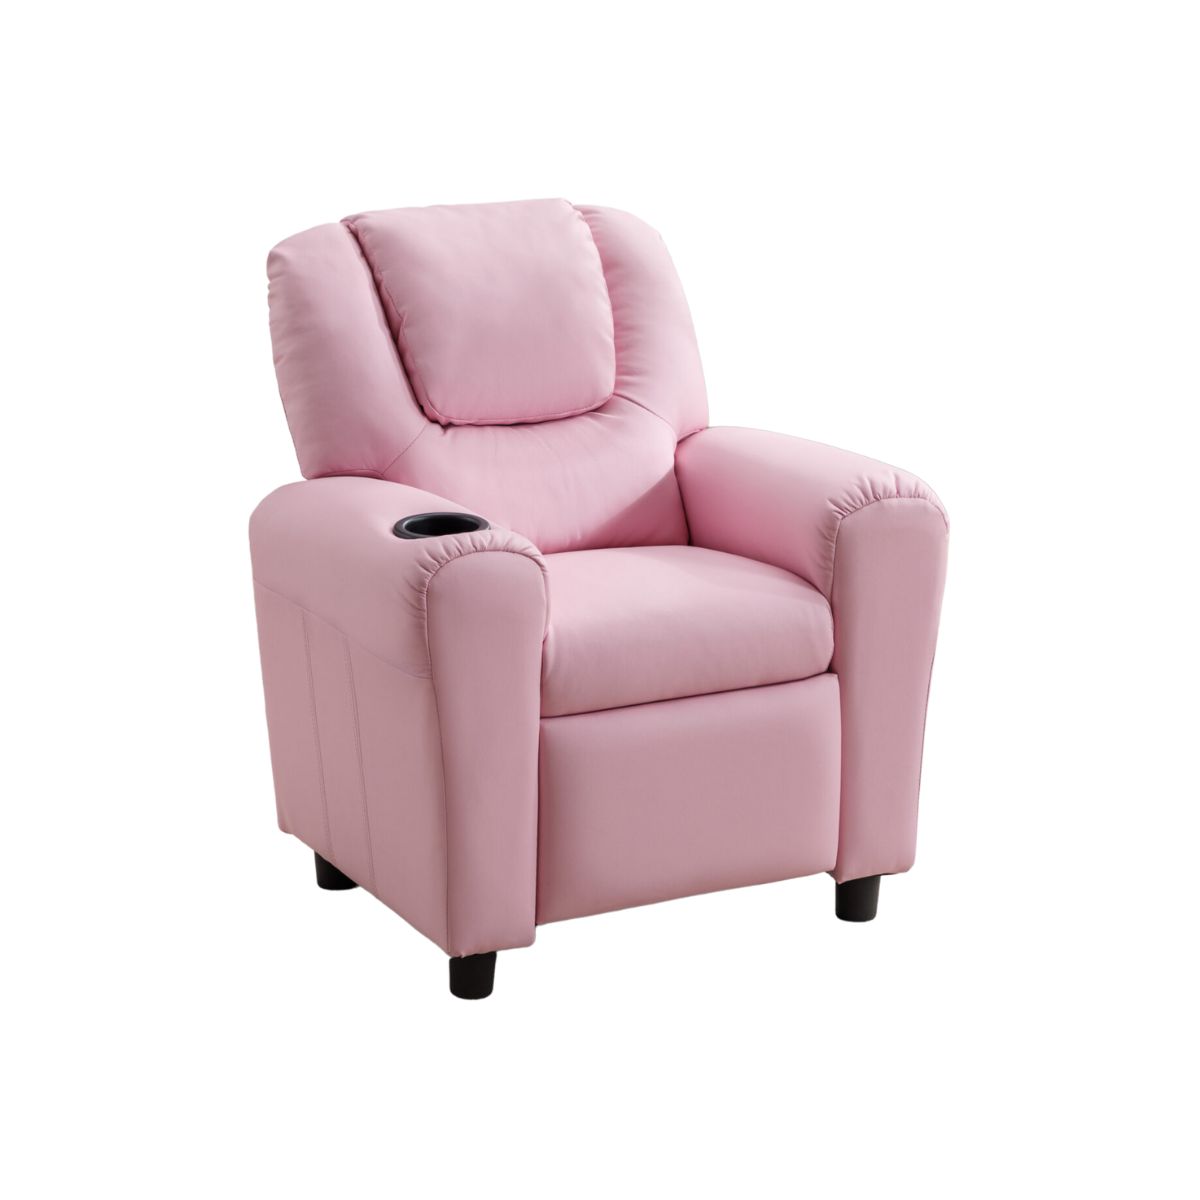 Kids Recliner Chair with Cup Holder Light Pink - 1